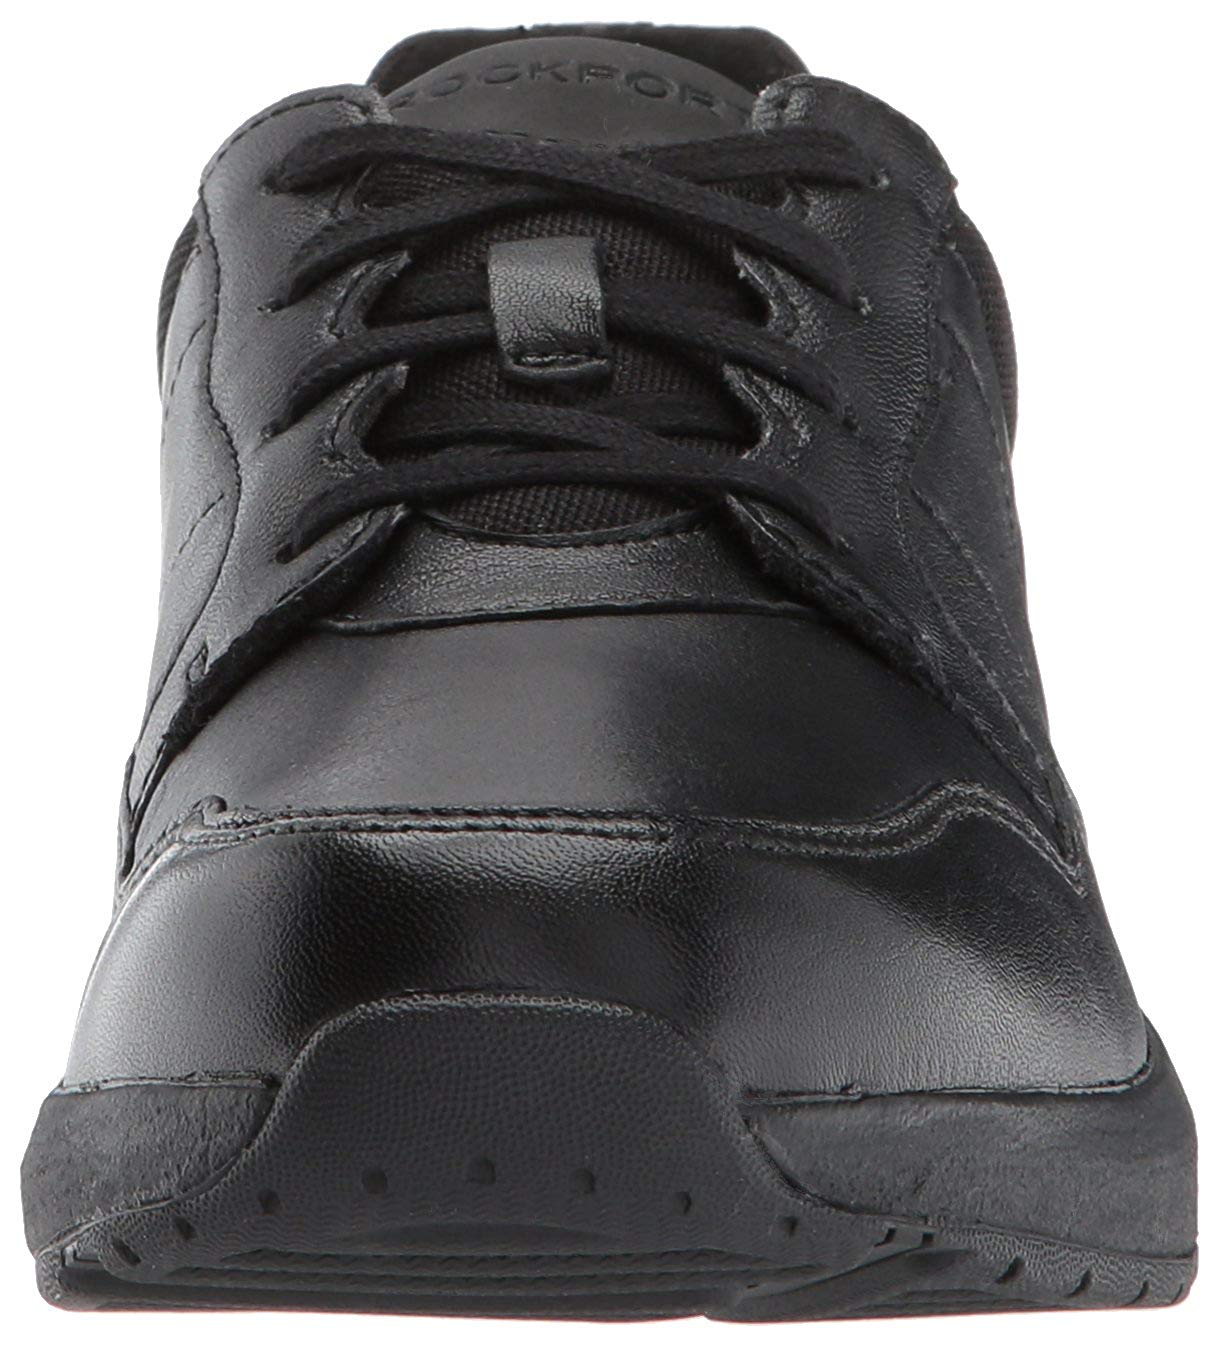 Rockport Womens tie Leather Low Top Lace Up Walking Shoes, Black, Size ...